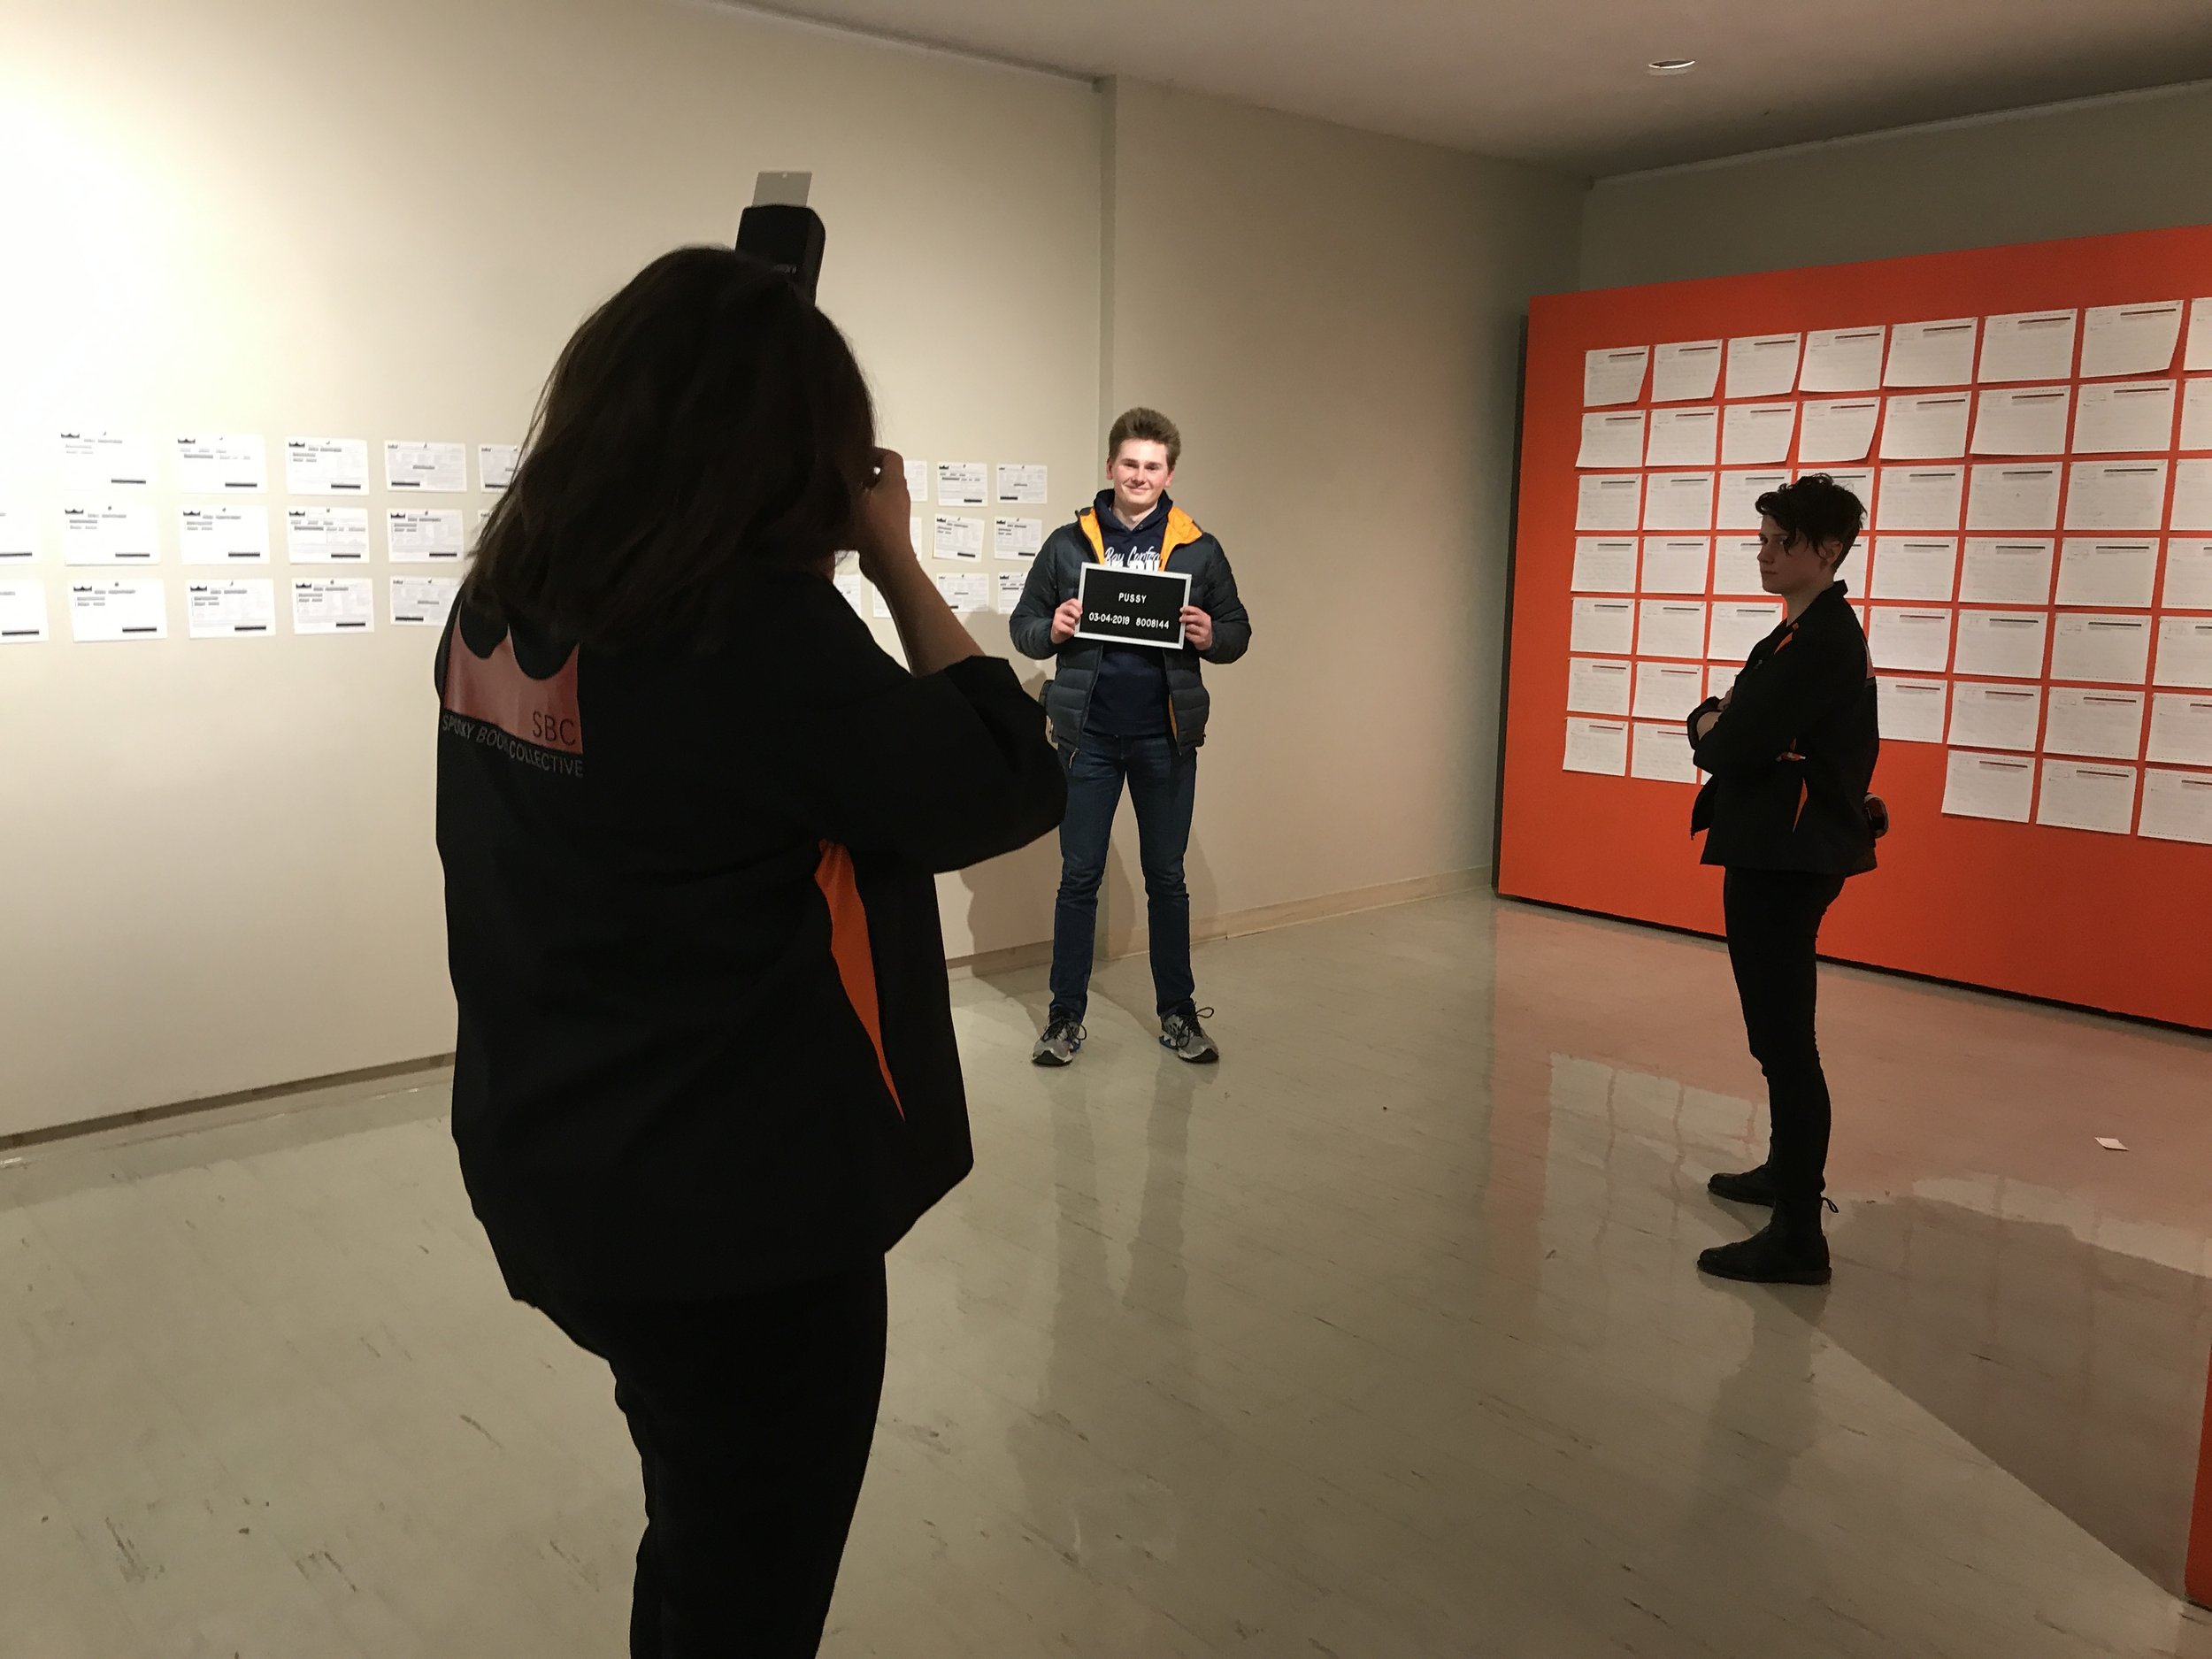  Documentation of performance during our solo exhibition  The Pervasive Curse  at the University of Wisconsin-Whitewater’s Crossman Gallery in Spring 2019. 